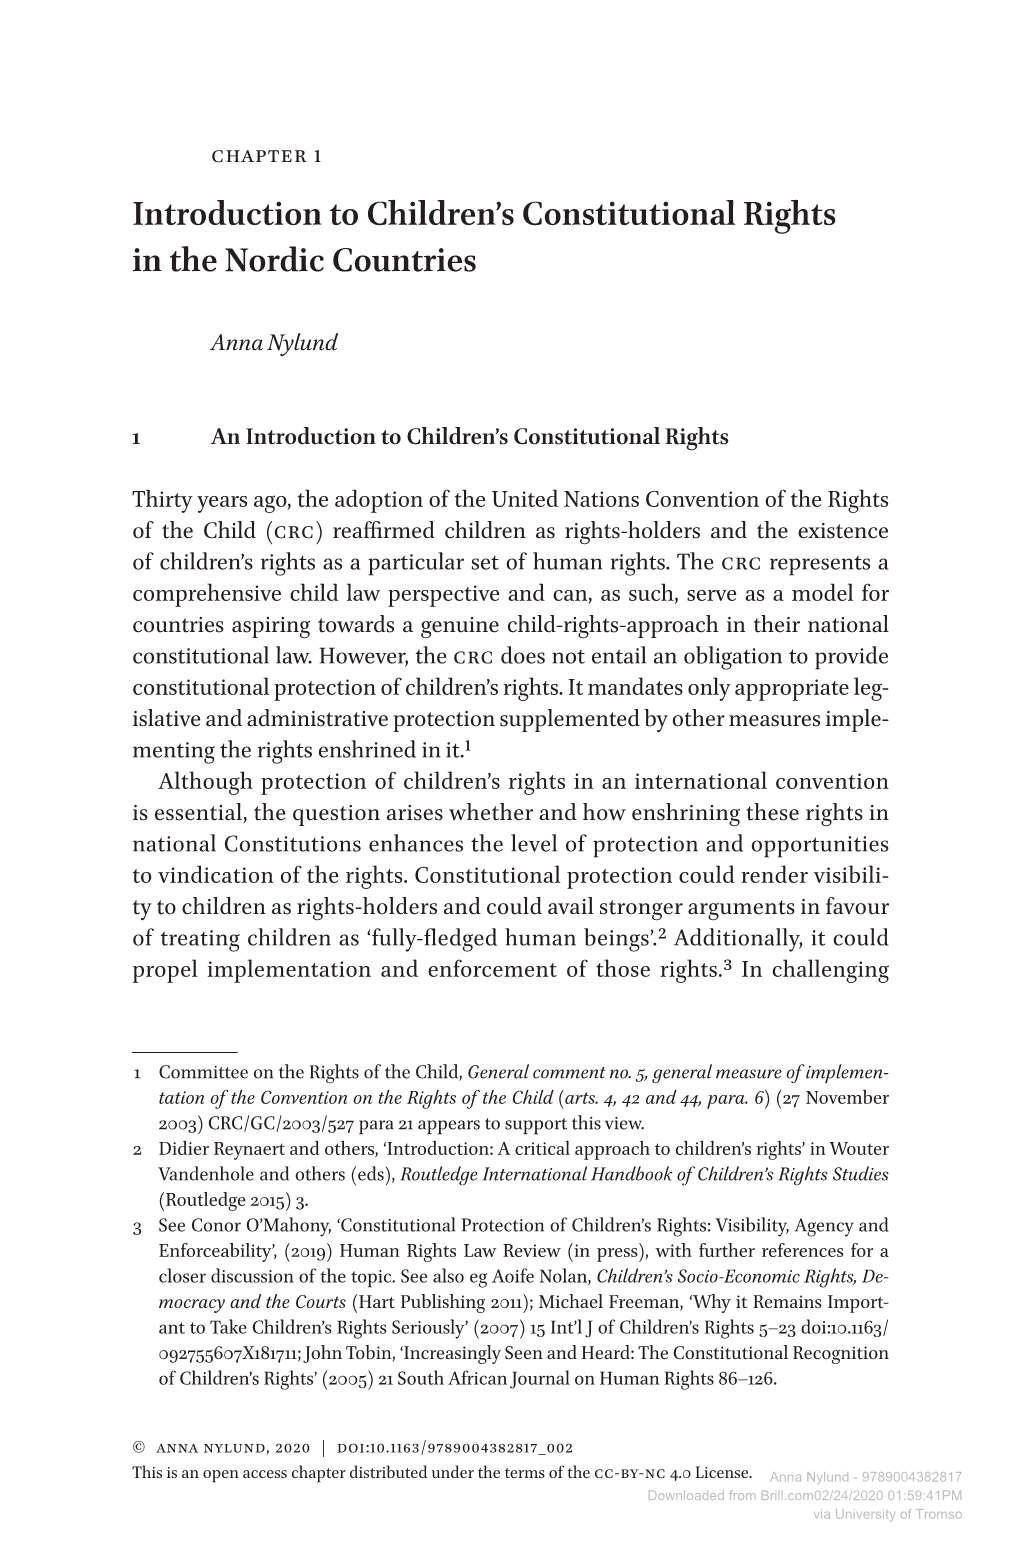 Introduction to Children's Constitutional Rights in the Nordic Countries